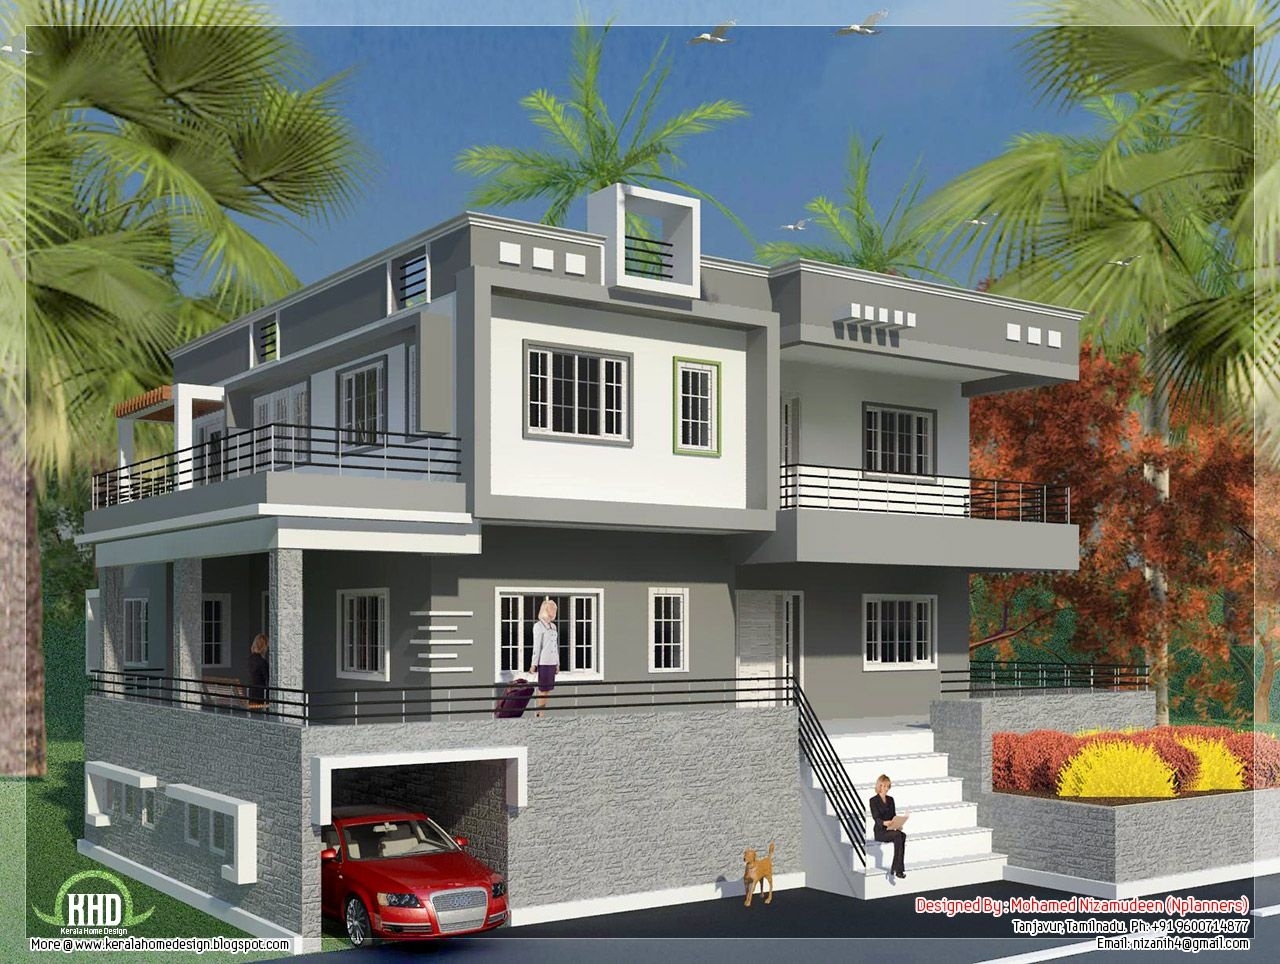 Amazing north indian style minimalist house exterior design in 2019 | house in fascinating simple indian house design pictures